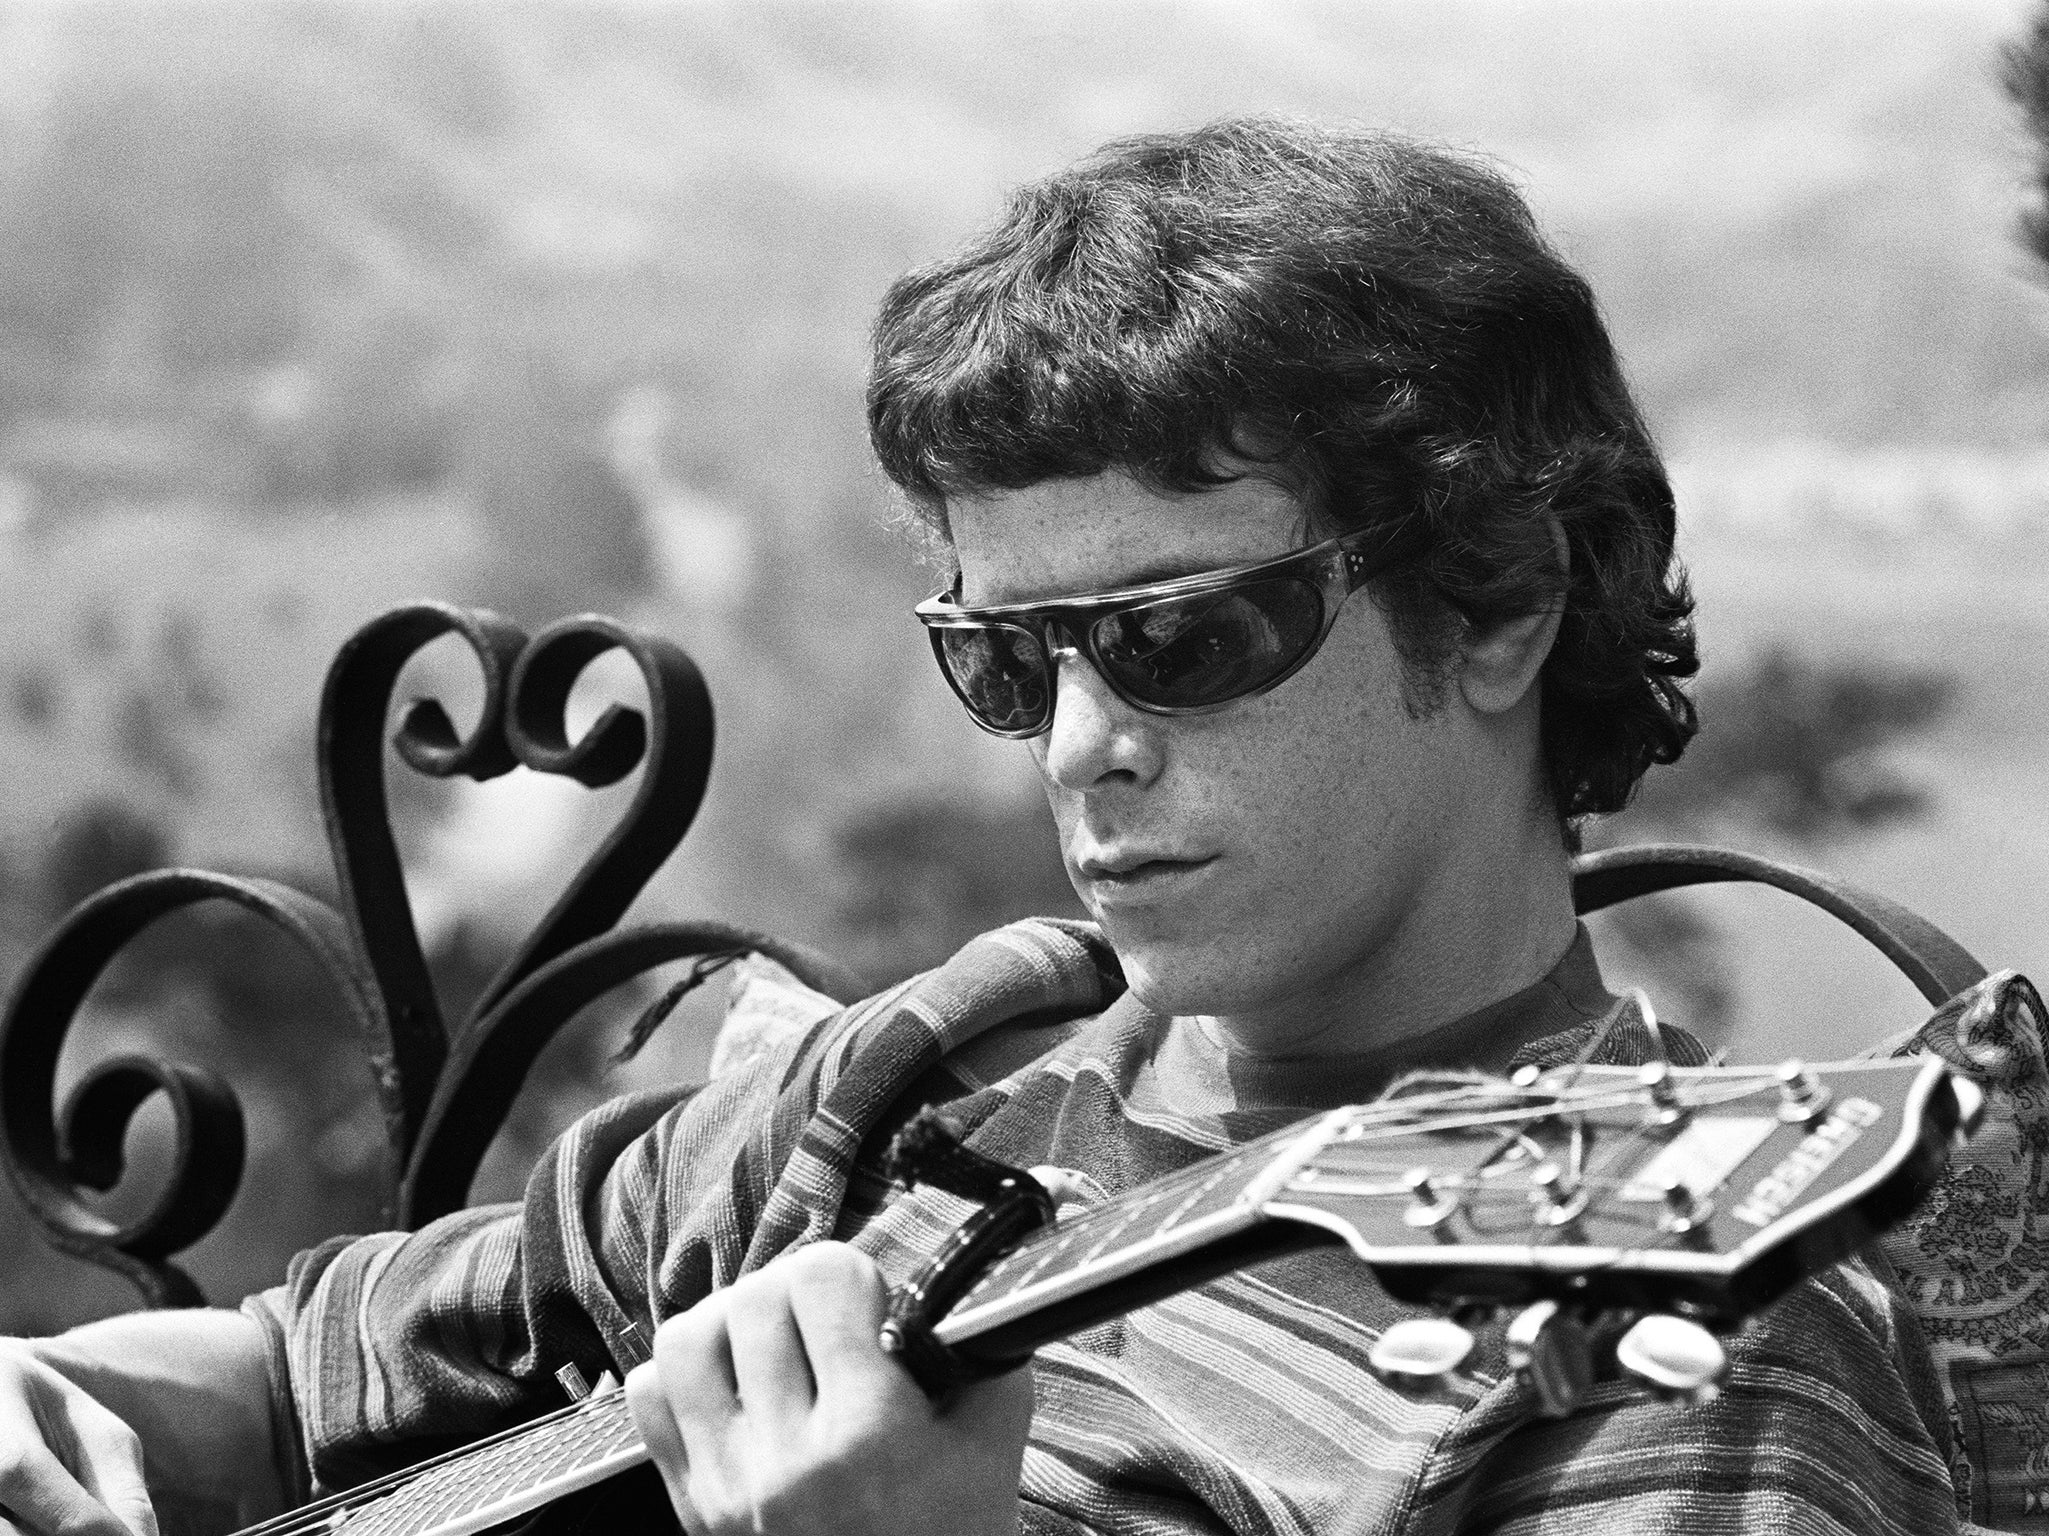 ‘He realised that he had inaugurated something’: The legendary musician Lou Reed